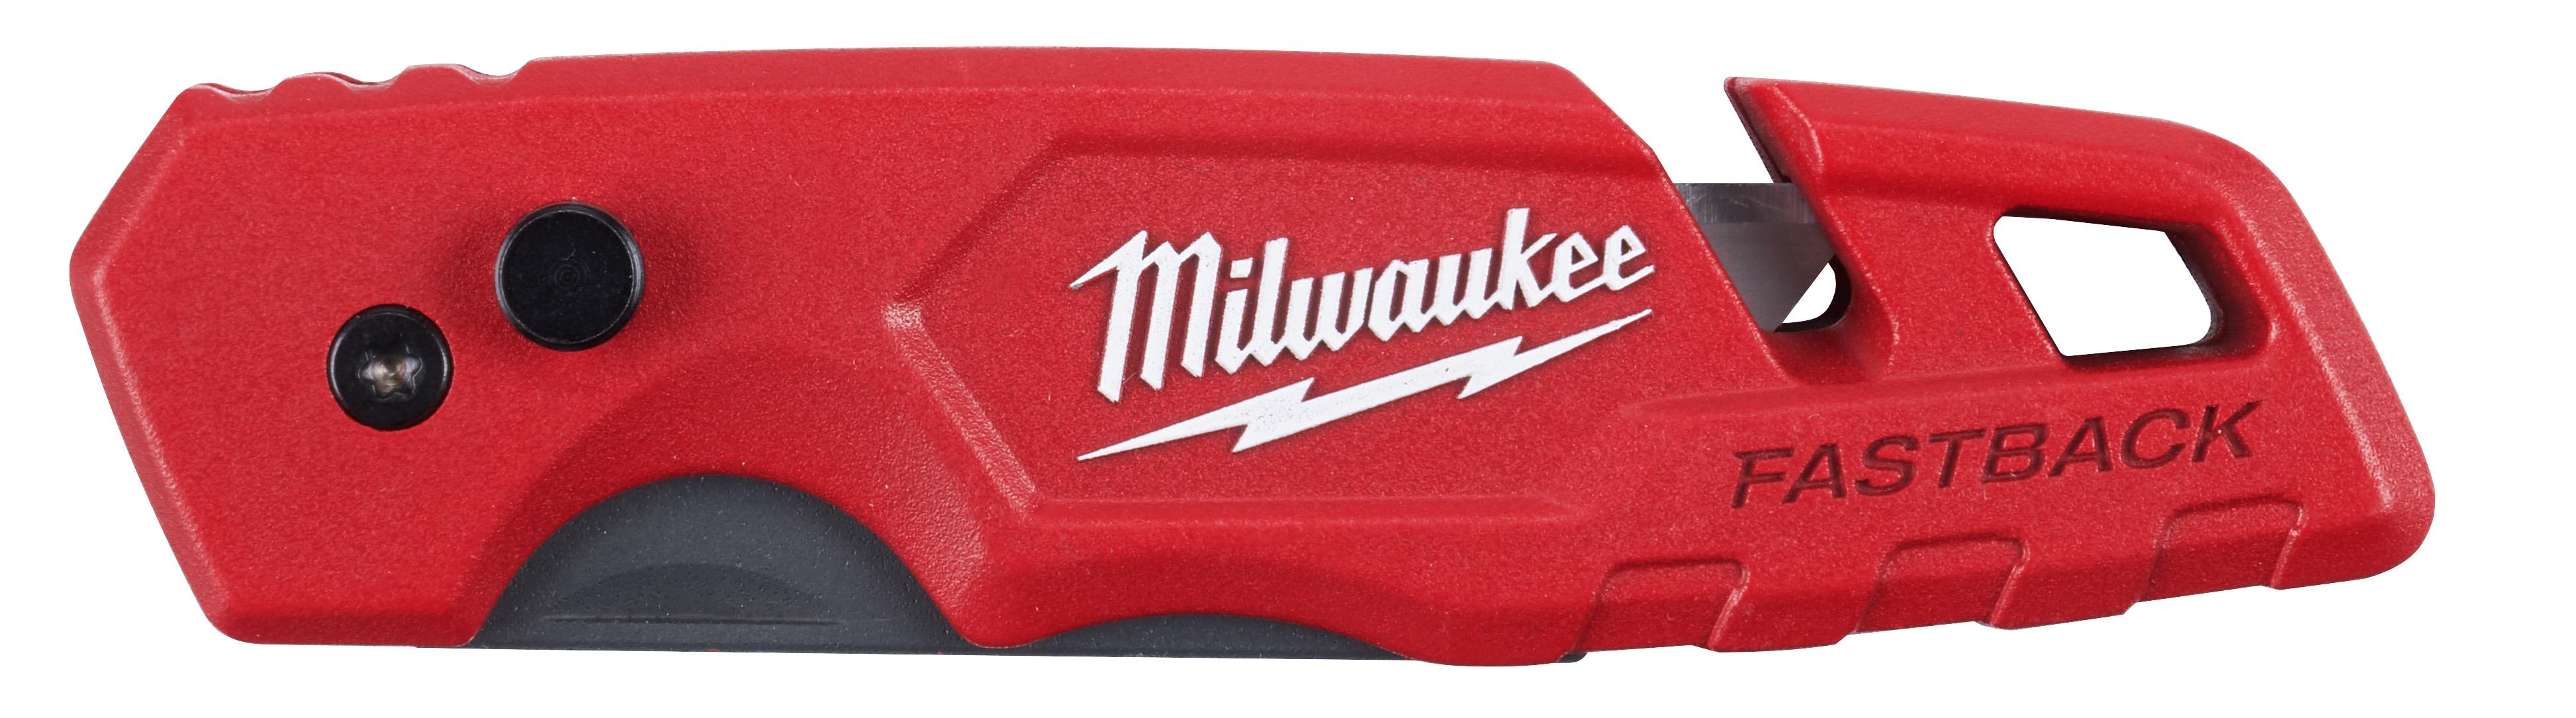 Milwaukee® FASTBACK™ 48-22-1502 Folding Utility Knife With Blade Storage, Steel Blade, 1 Blades Included, 6.87 in OAL